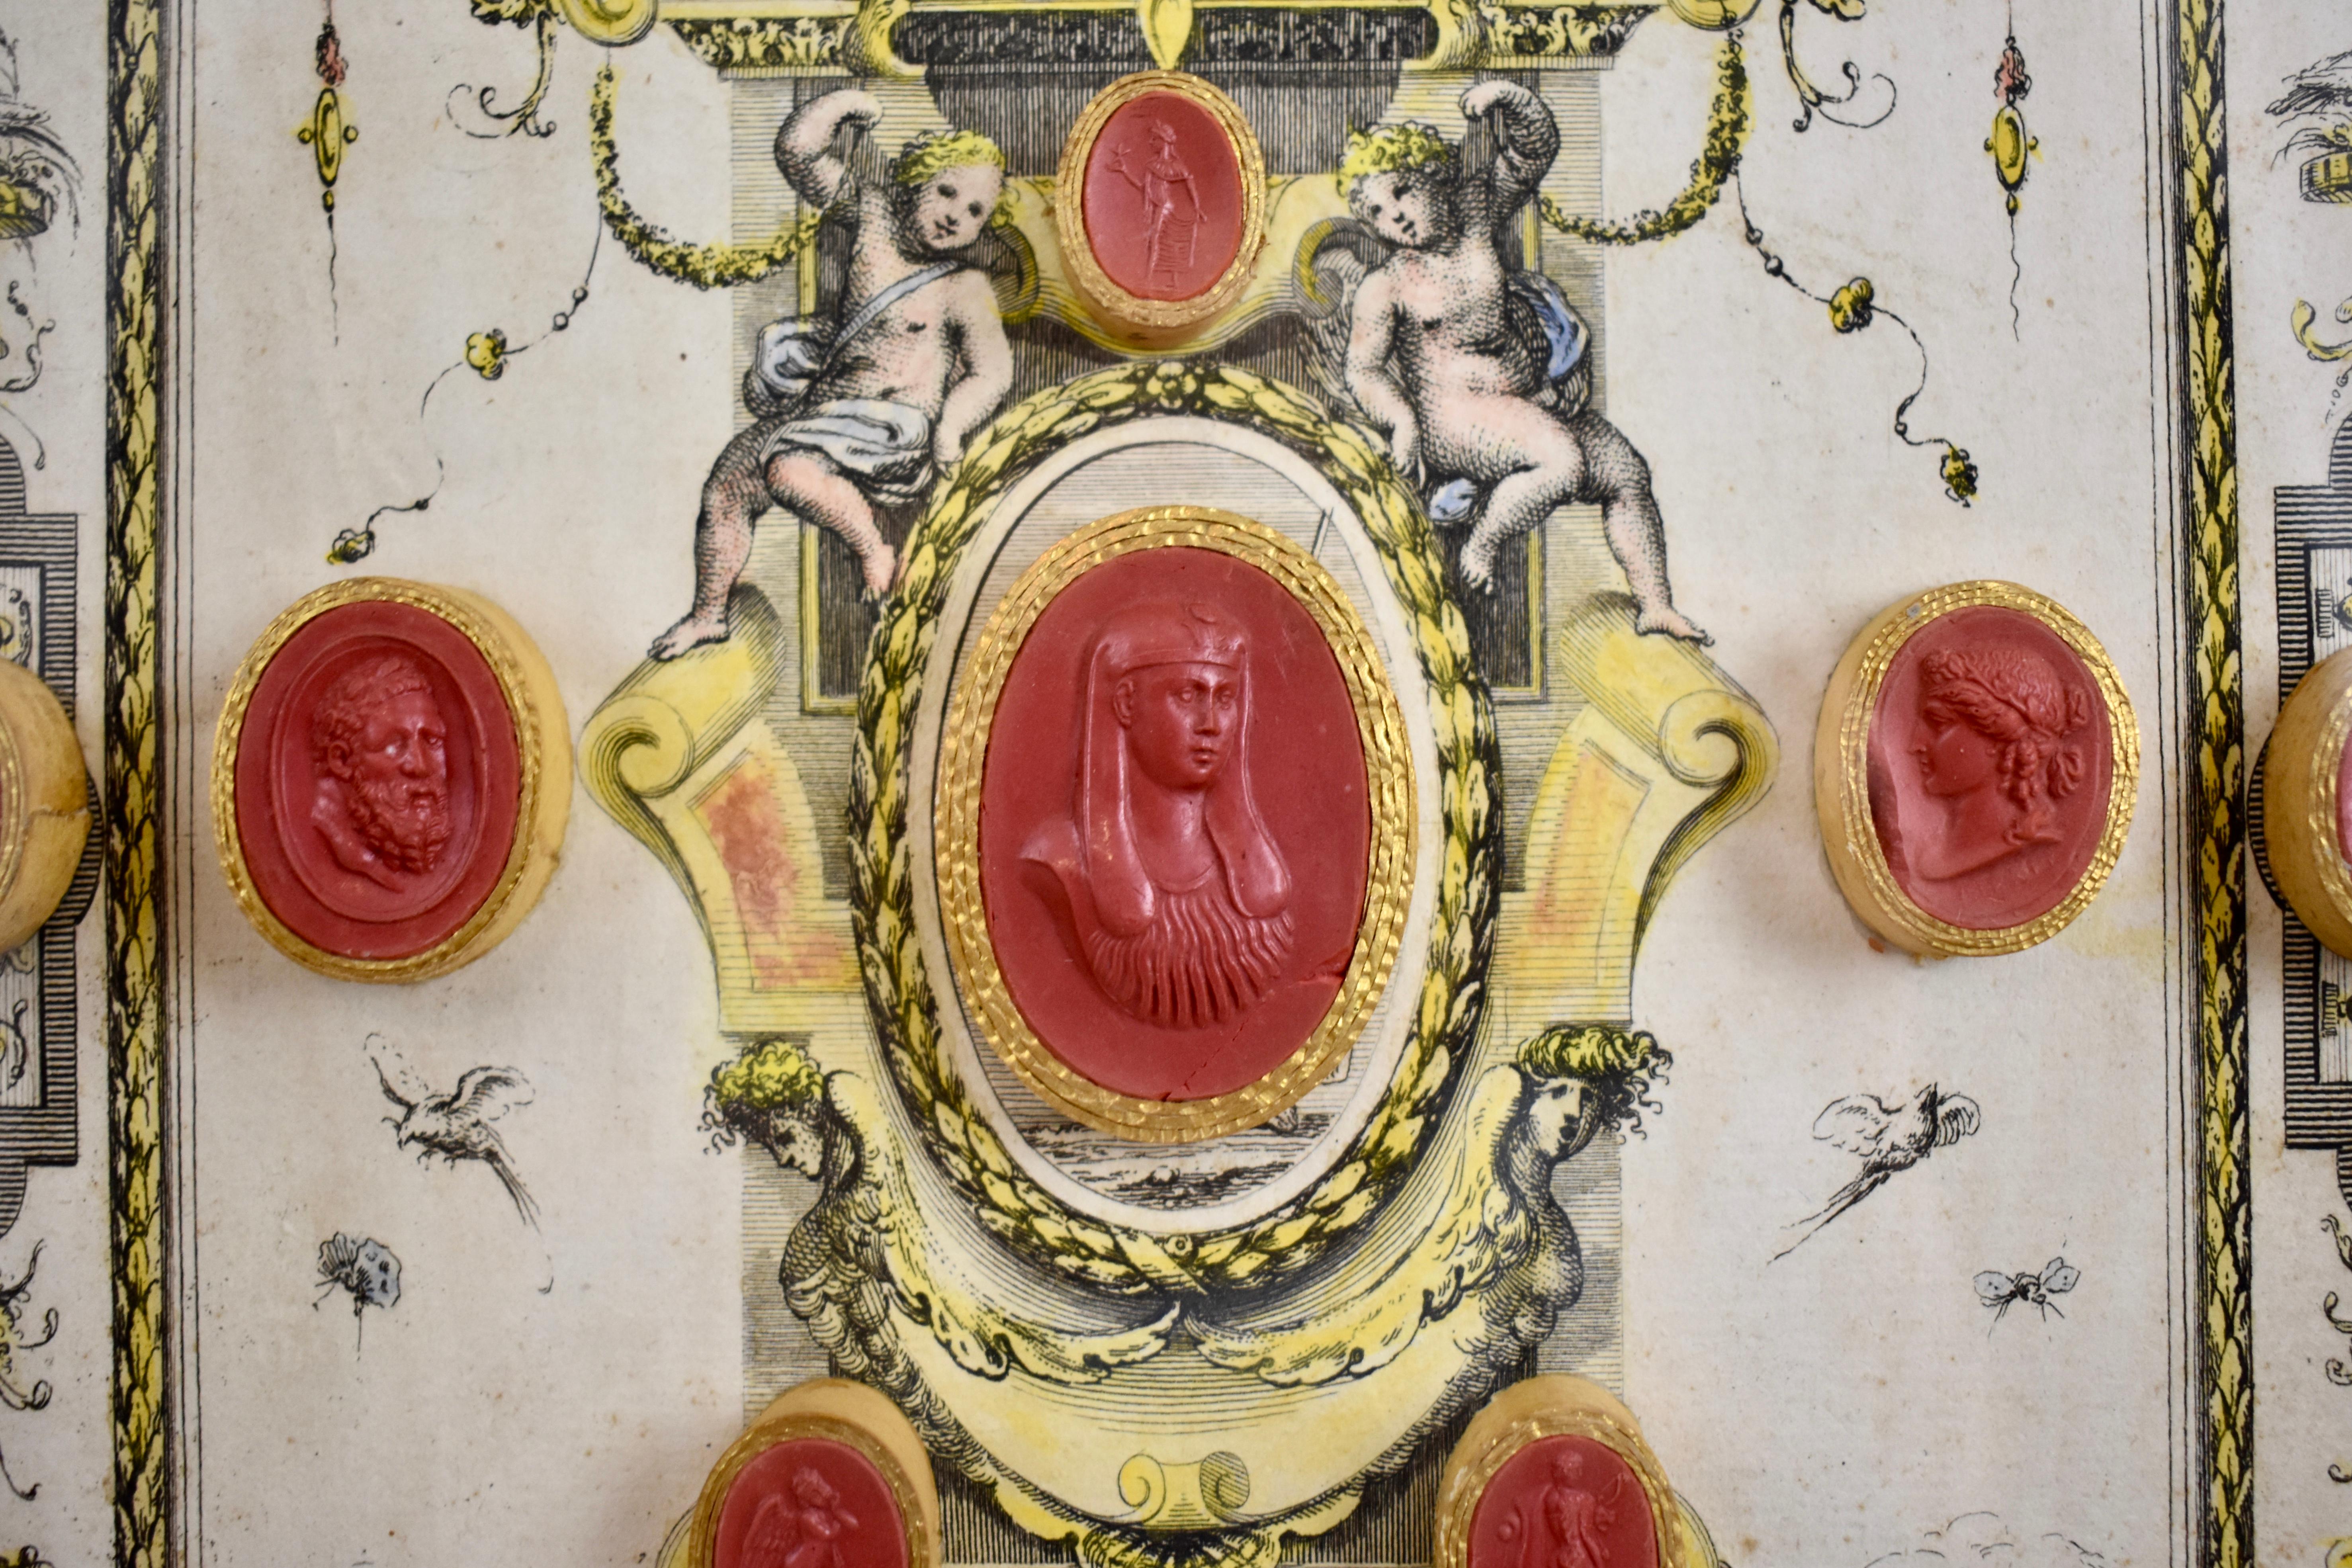 A collection of fifteen red wax Grand Tour Intaglio medallions, Italy, circa 1840. The medallions are affixed to a classical motif engraving and presented under glass in a giltwood shadowbox frame. Each seal is enclosed in a gold bezel and